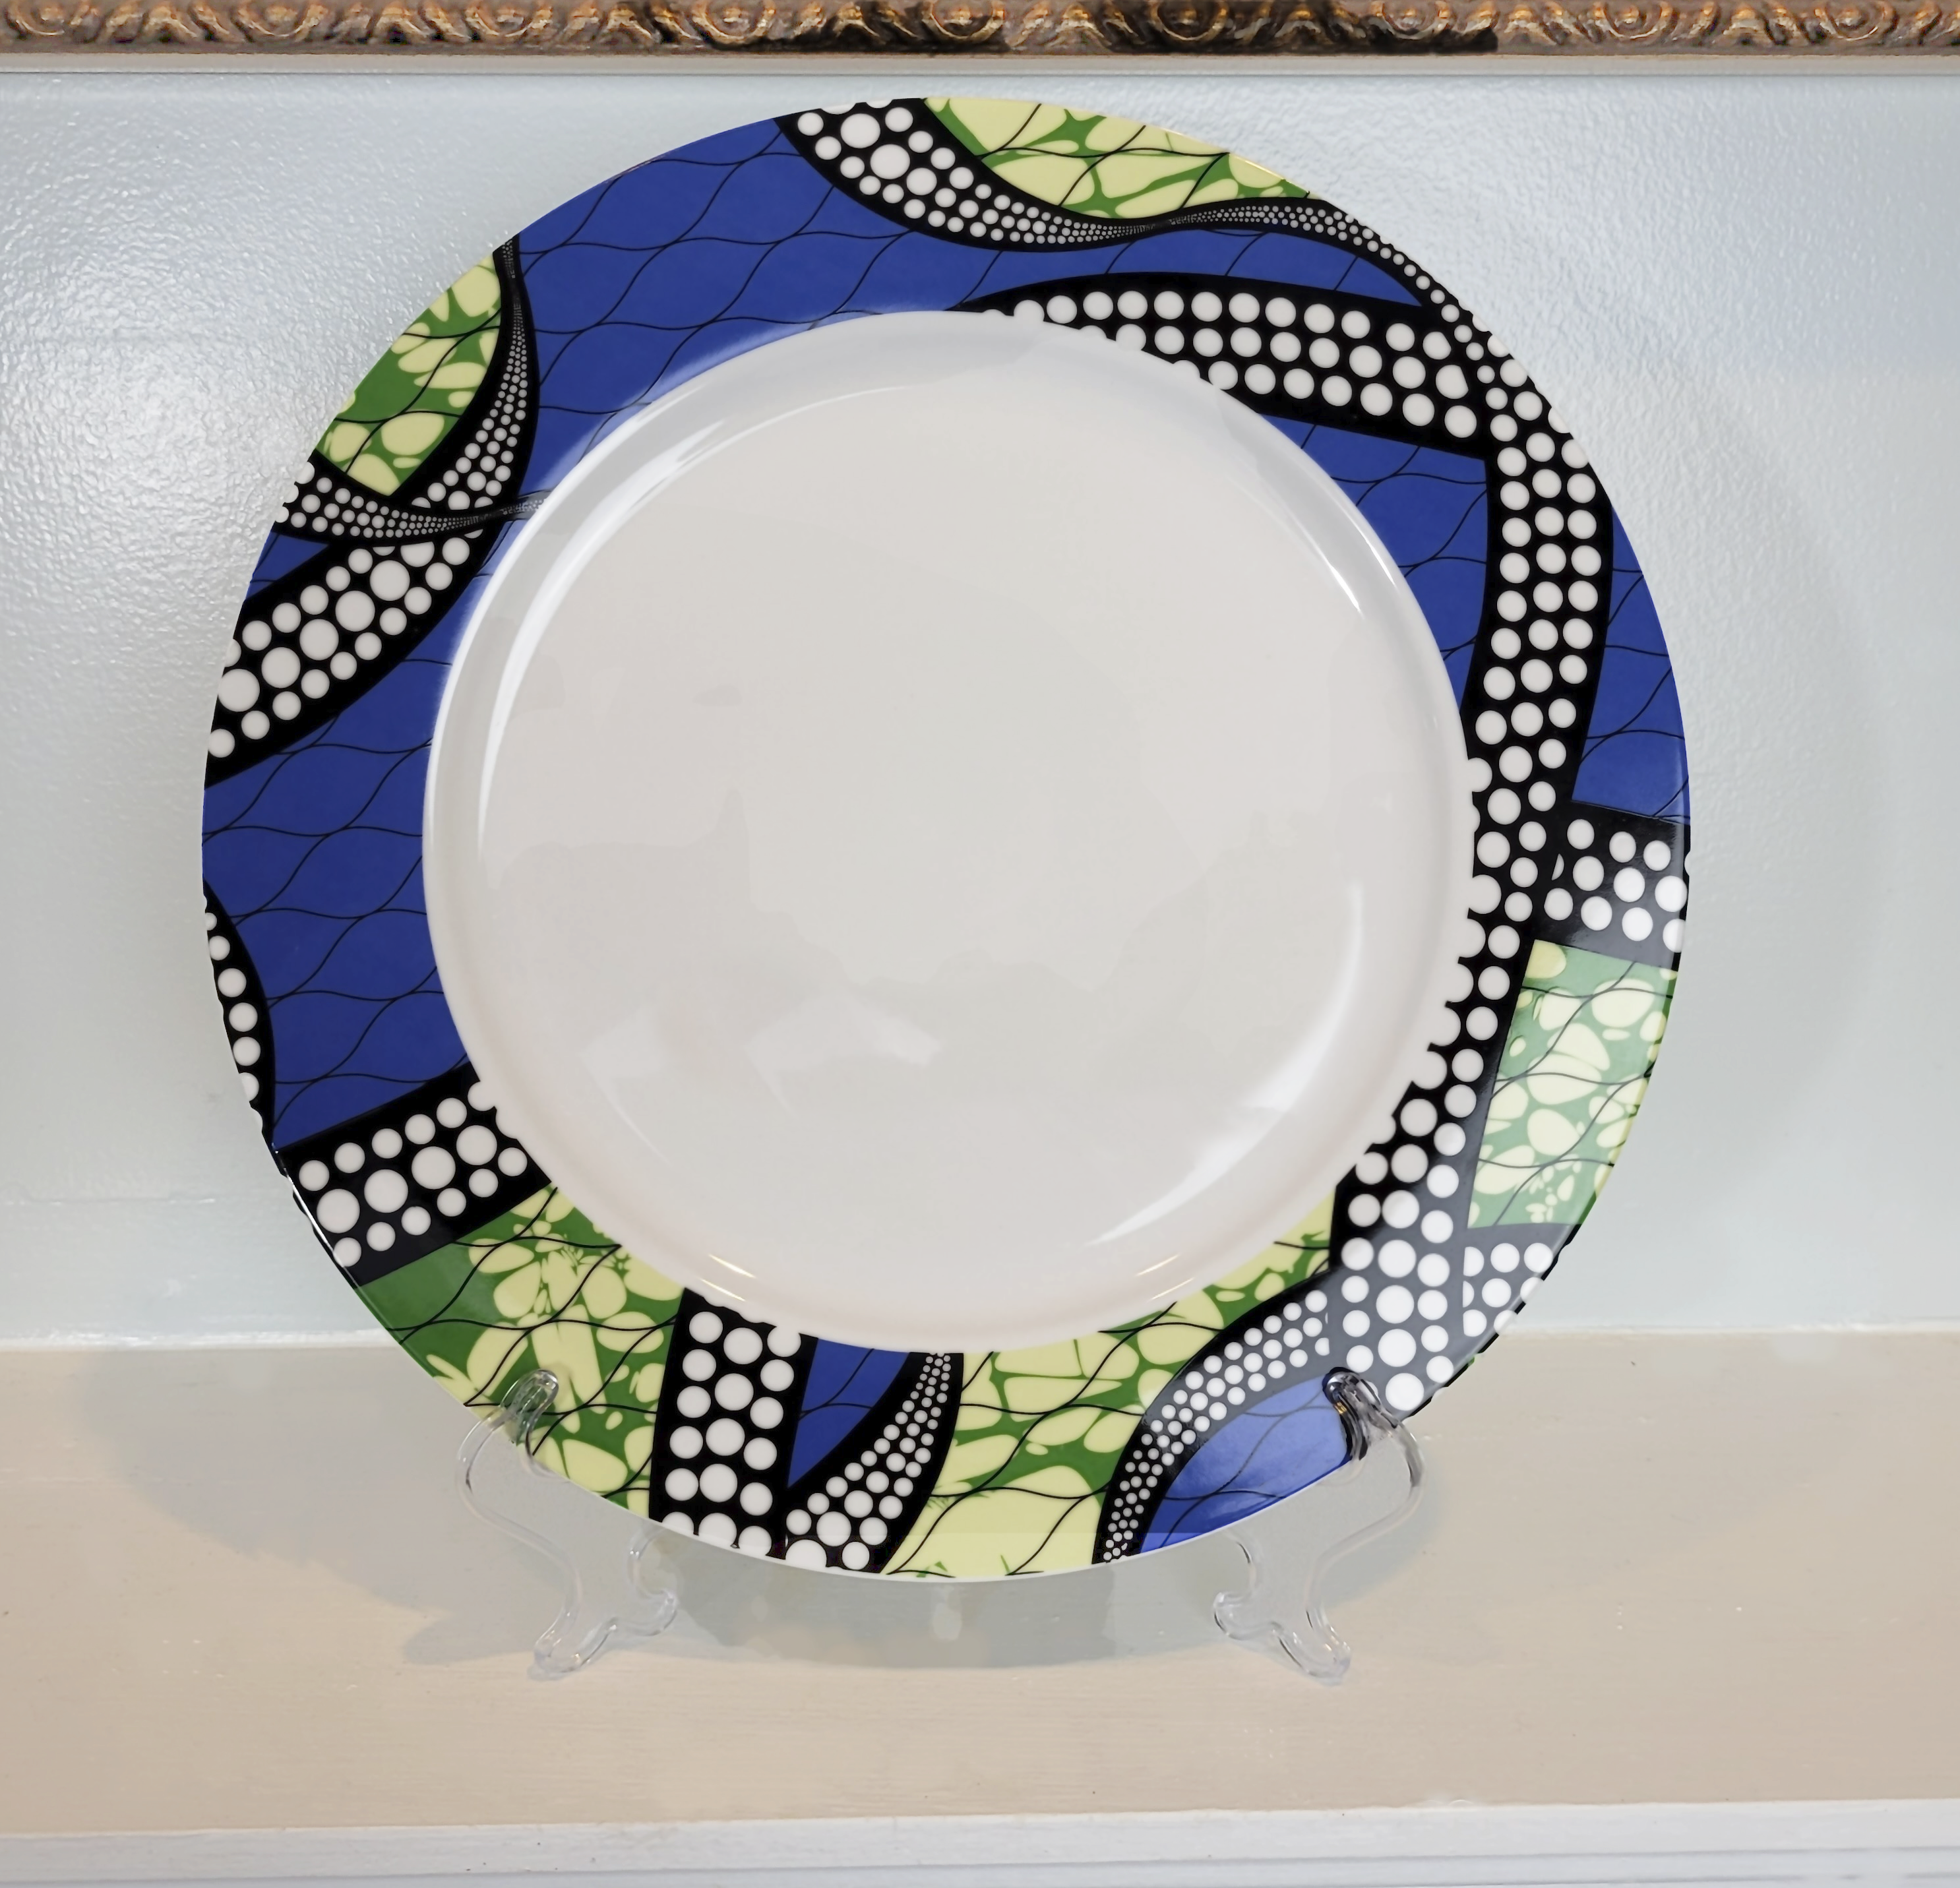 This is a ceramic plate with abstract African patterns around the rim of the plate. In the art you can see a flat black rope with white polka dots like pearls, looping randomly around the plate.